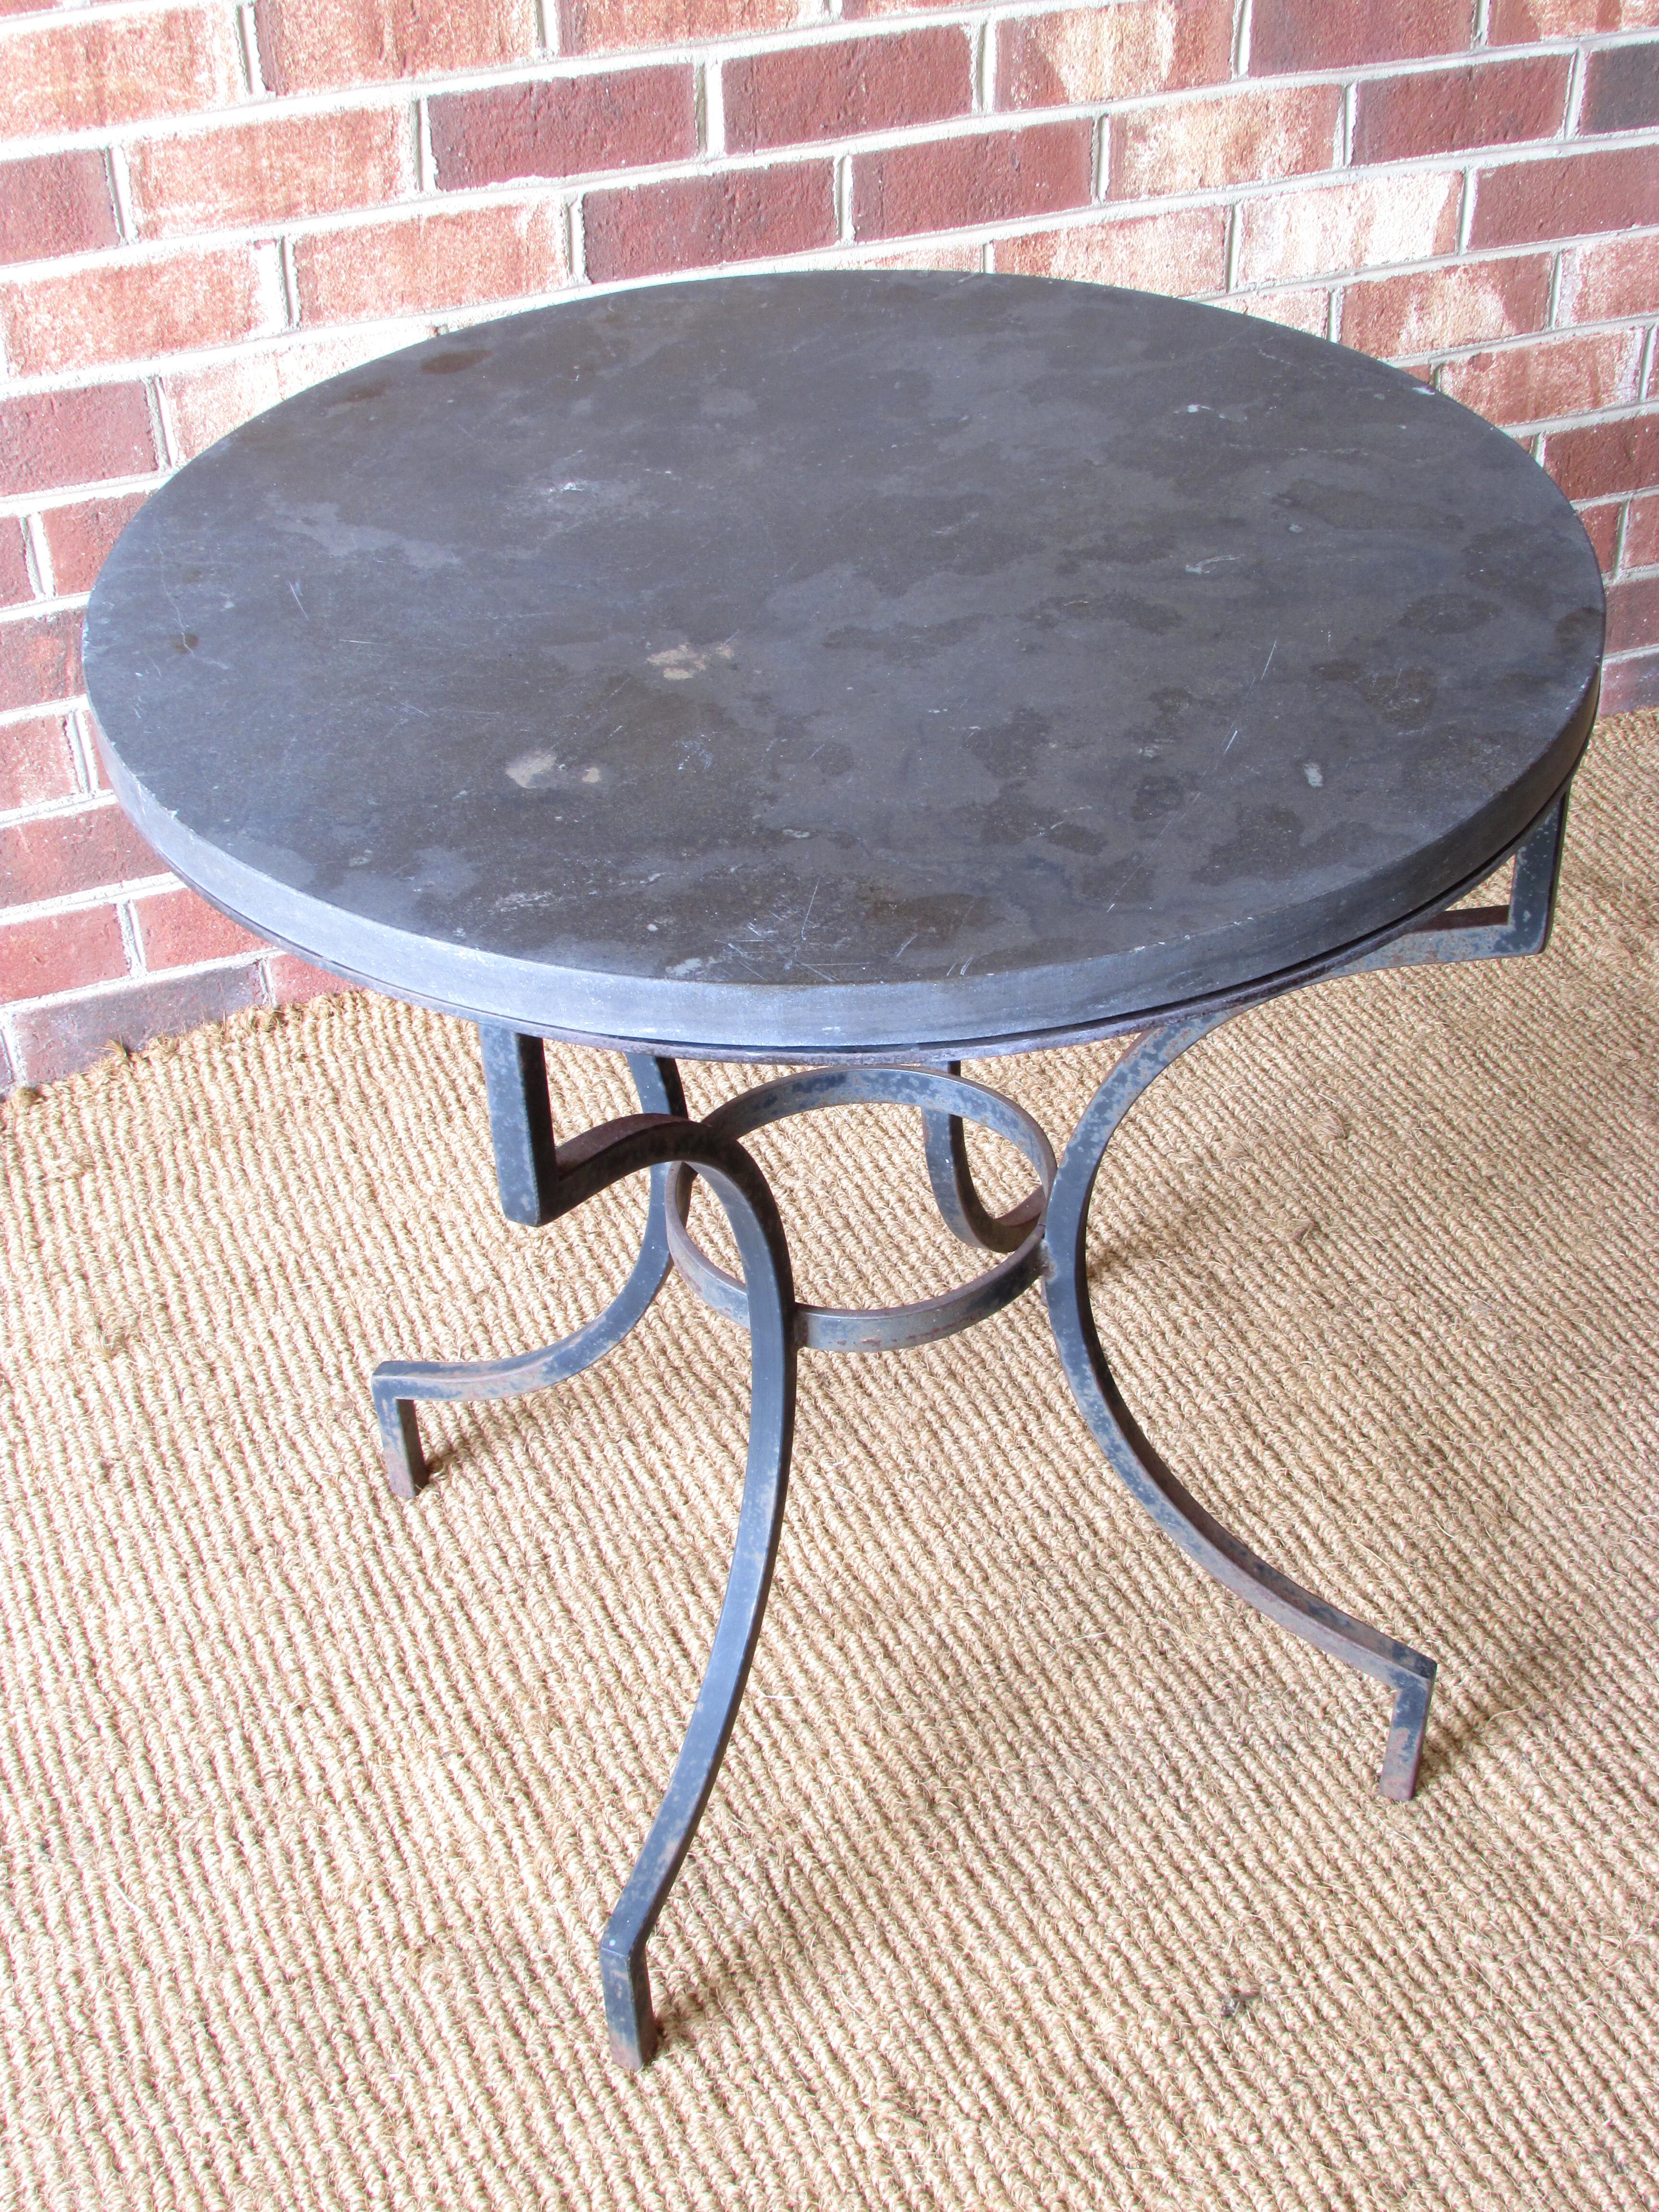 Lamp table with wrought iron base and round slate top.